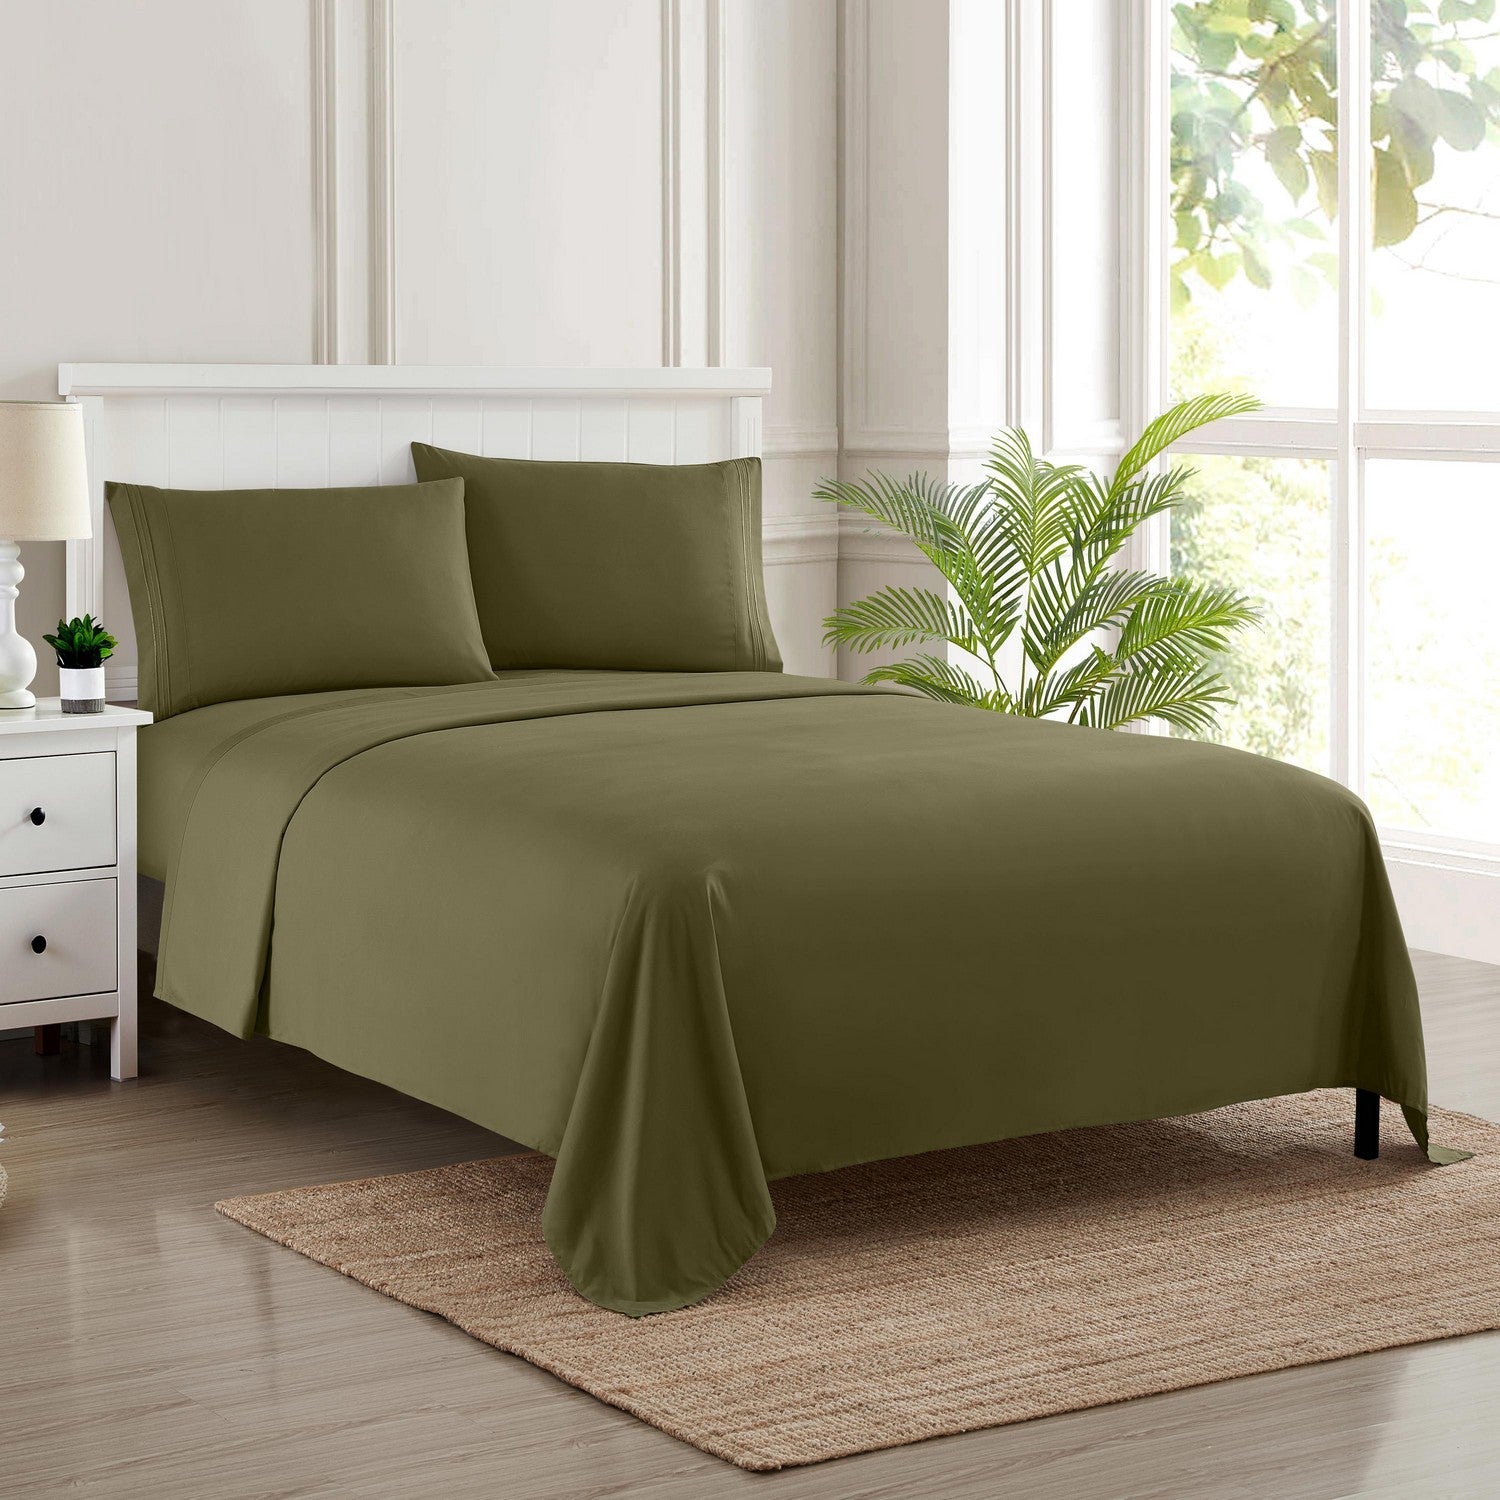 Classic 4-Piece Bed Sheet Set (Olive) - Bed